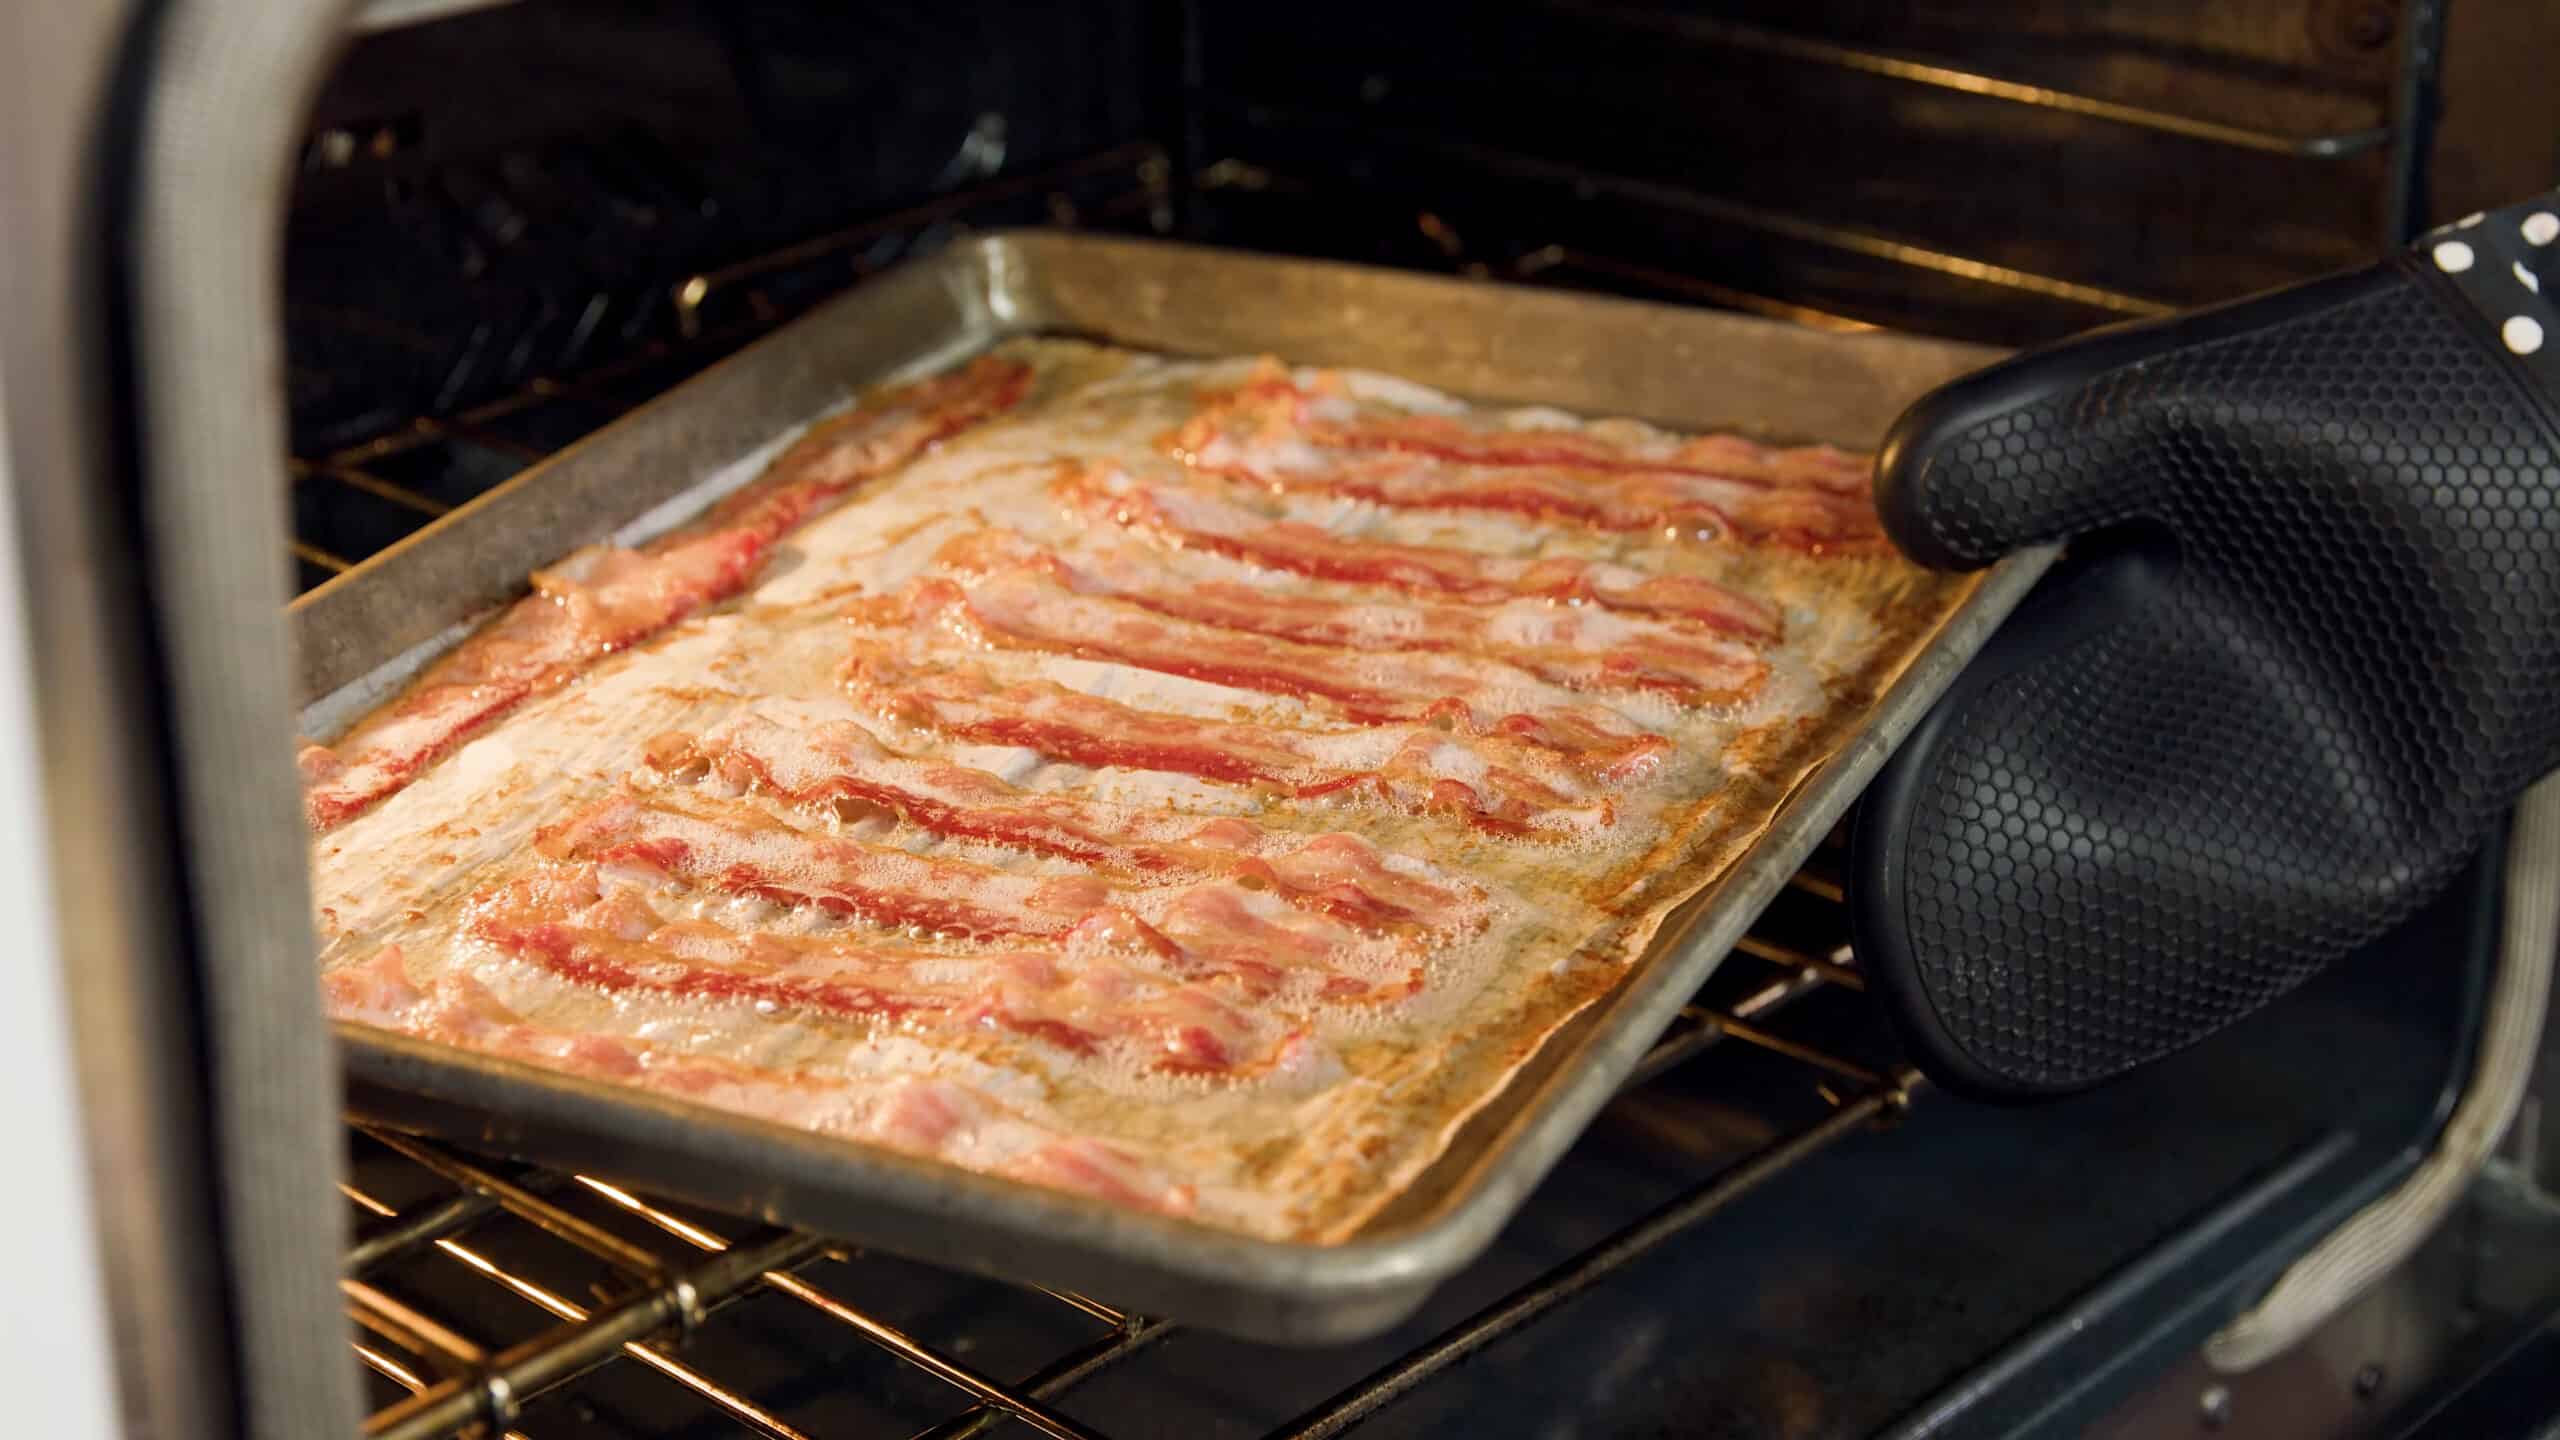 Angled view of an open oven with a metal baking sheet lined with parchment paper and cooking golden brown strips of bacon being pulled off of the metal rack in the middle of the oven.